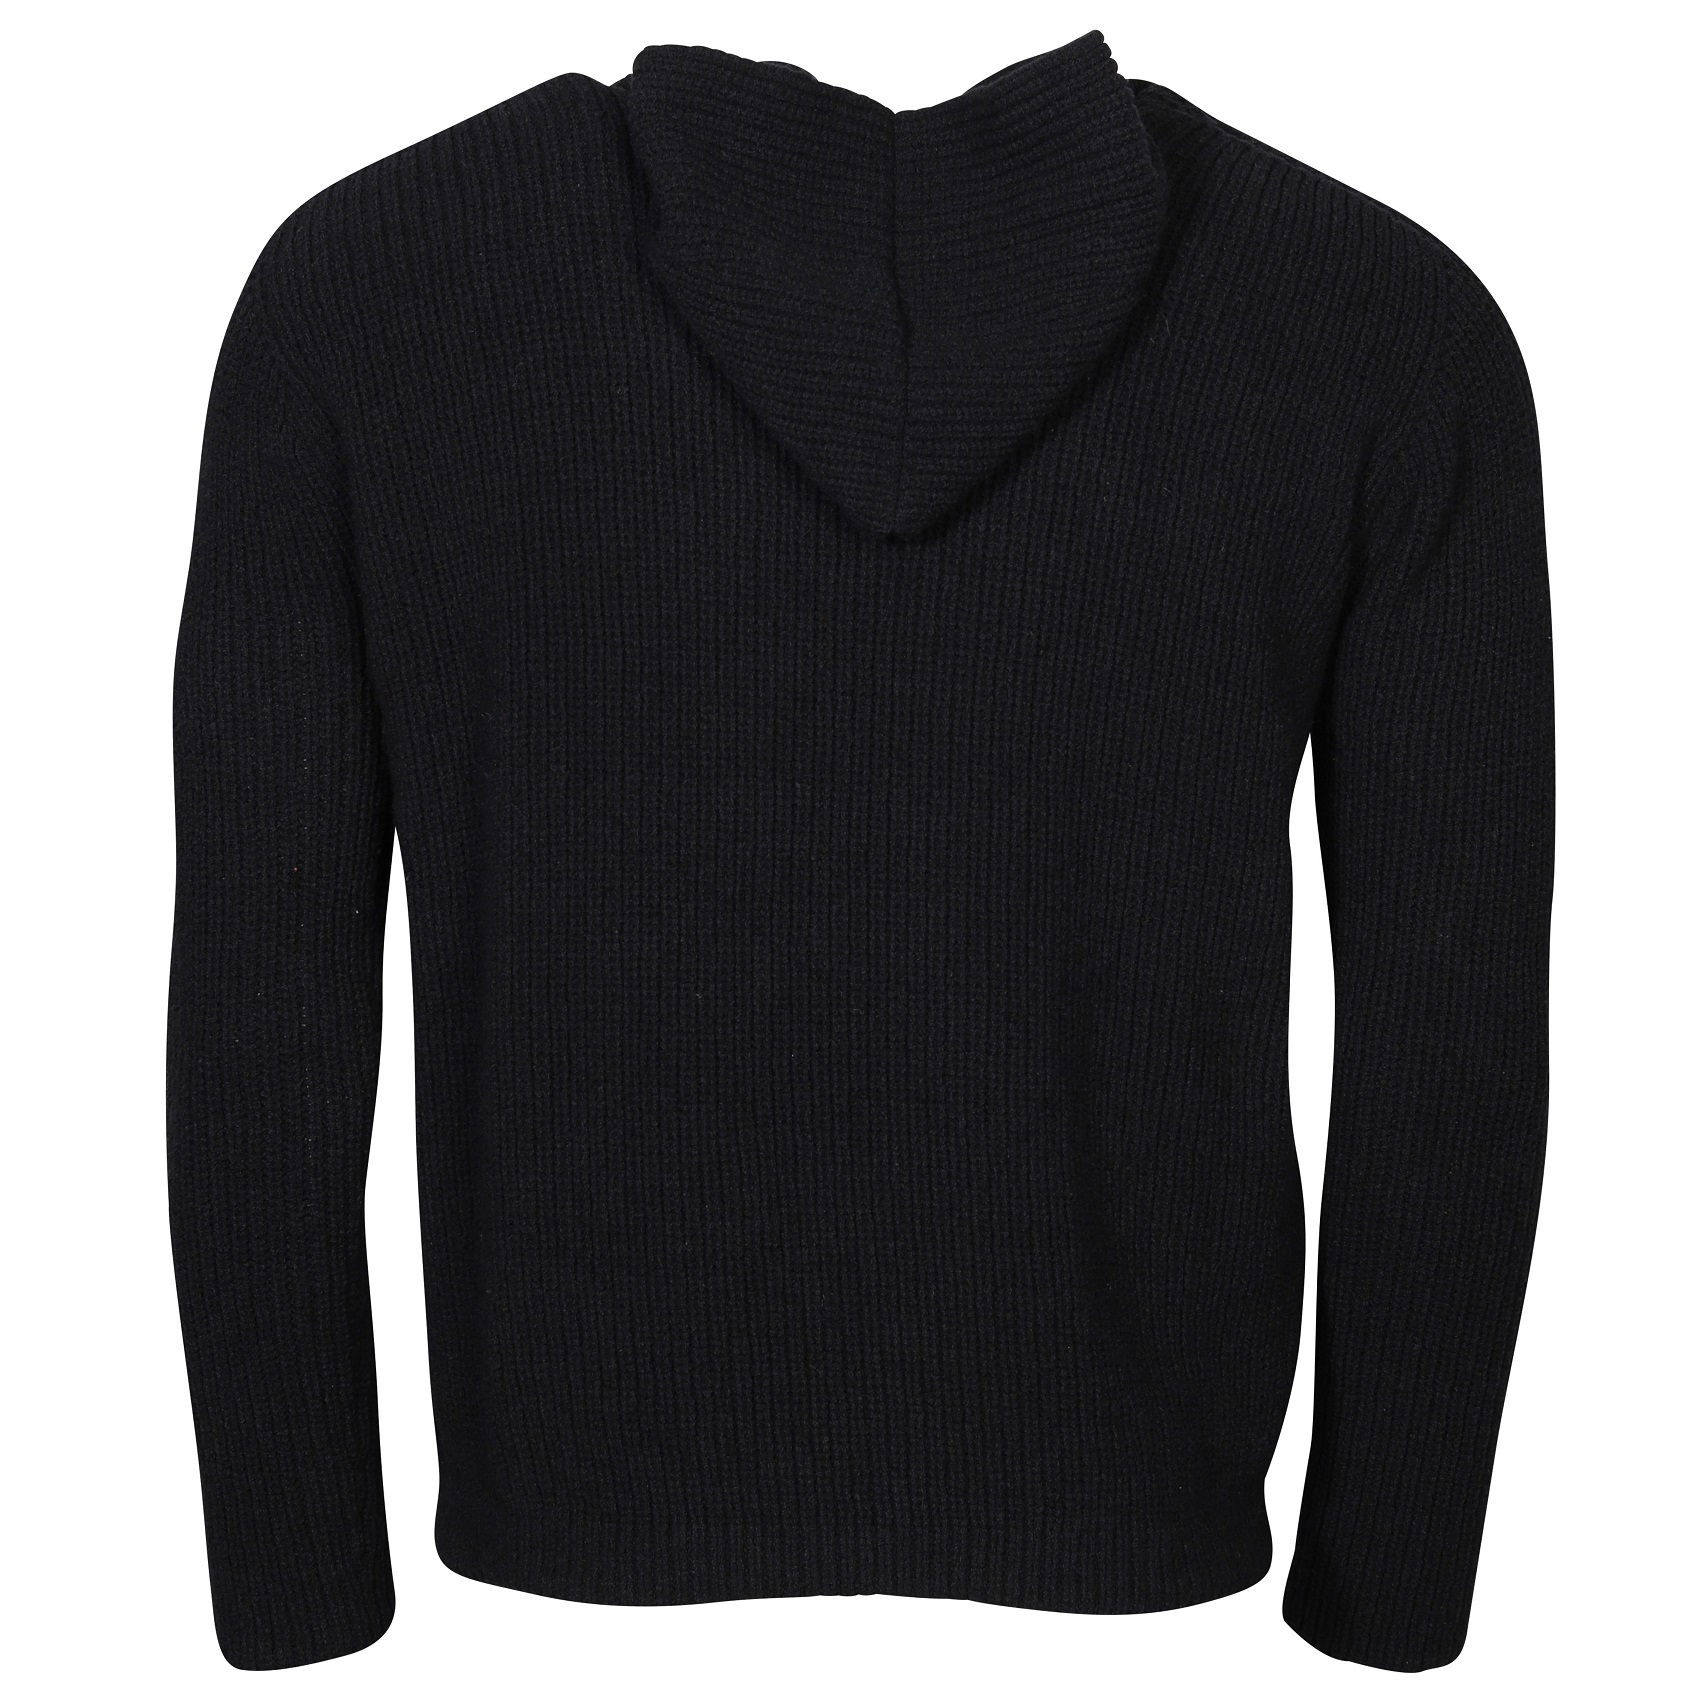 Hannes Roether Hooded Knit Pullover in Black